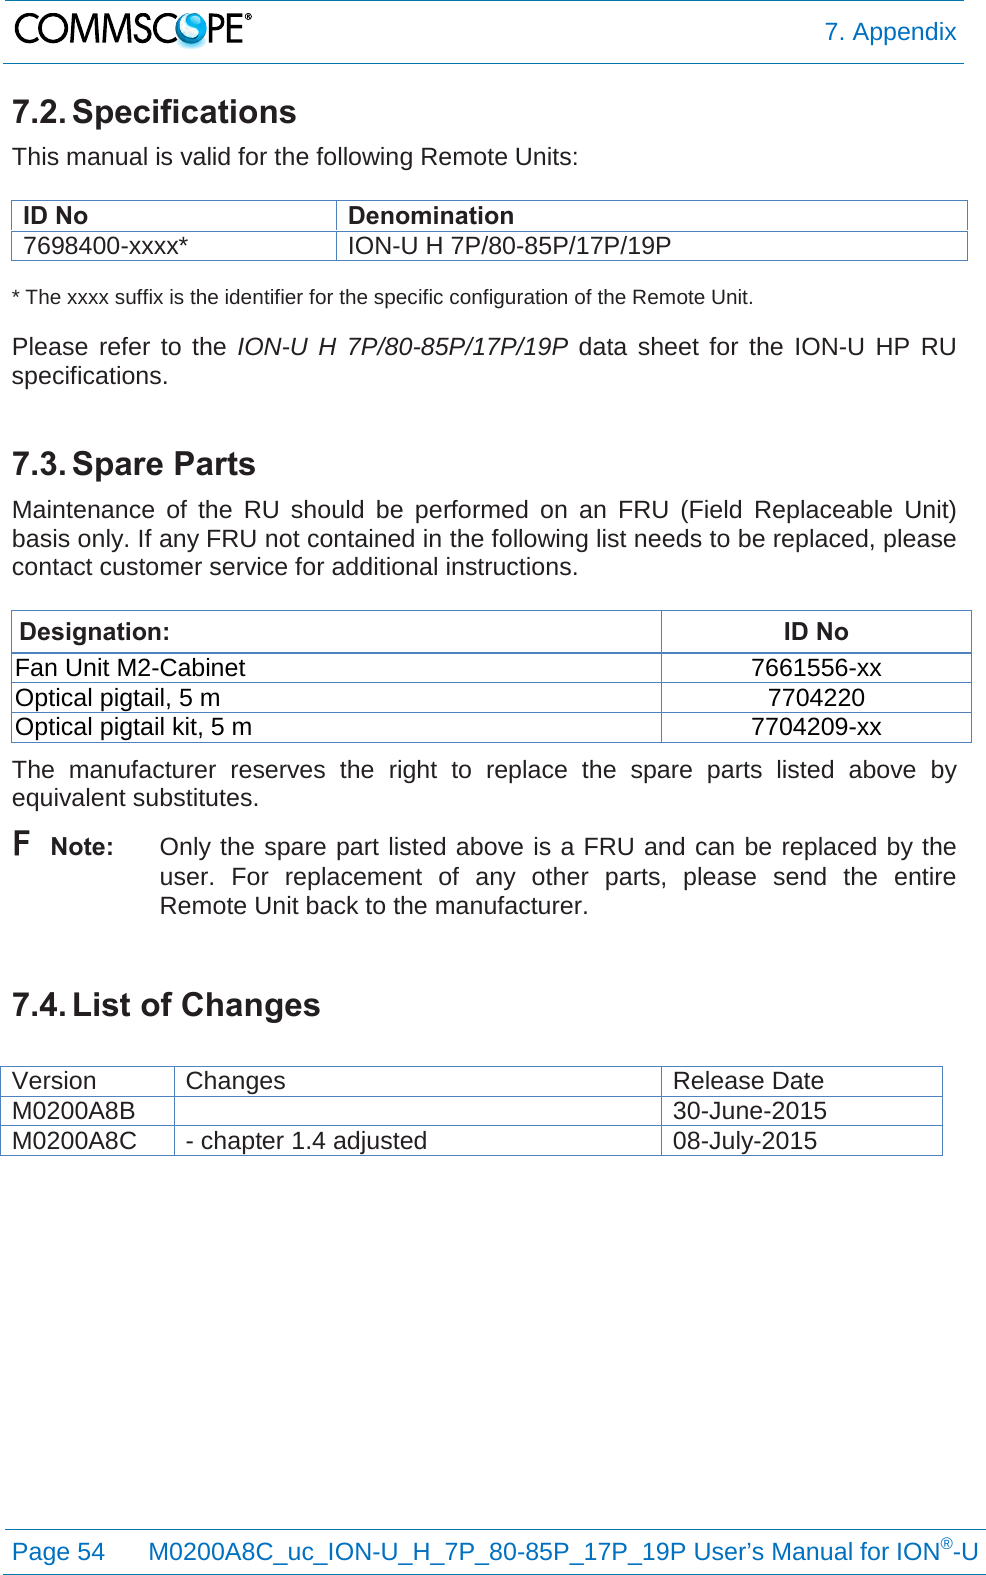  7. Appendix  Page 54 M0200A8C_uc_ION-U_H_7P_80-85P_17P_19P User’s Manual for ION®-U  7.2. Specifications This manual is valid for the following Remote Units:  ID No Denomination 7698400-xxxx* ION-U H 7P/80-85P/17P/19P  * The xxxx suffix is the identifier for the specific configuration of the Remote Unit.  Please refer to the ION-U H 7P/80-85P/17P/19P data sheet for the ION-U HP RU specifications.  7.3. Spare Parts Maintenance of the RU should be performed on an FRU (Field Replaceable Unit) basis only. If any FRU not contained in the following list needs to be replaced, please contact customer service for additional instructions.  Designation: ID No Fan Unit M2-Cabinet 7661556-xx Optical pigtail, 5 m 7704220 Optical pigtail kit, 5 m 7704209-xx The manufacturer reserves the right to replace the spare parts listed above by equivalent substitutes. F Note: Only the spare part listed above is a FRU and can be replaced by the user. For replacement of any other parts, please send the entire Remote Unit back to the manufacturer.  7.4. List of Changes  Version Changes Release Date M0200A8B  30-June-2015 M0200A8C - chapter 1.4 adjusted 08-July-2015  